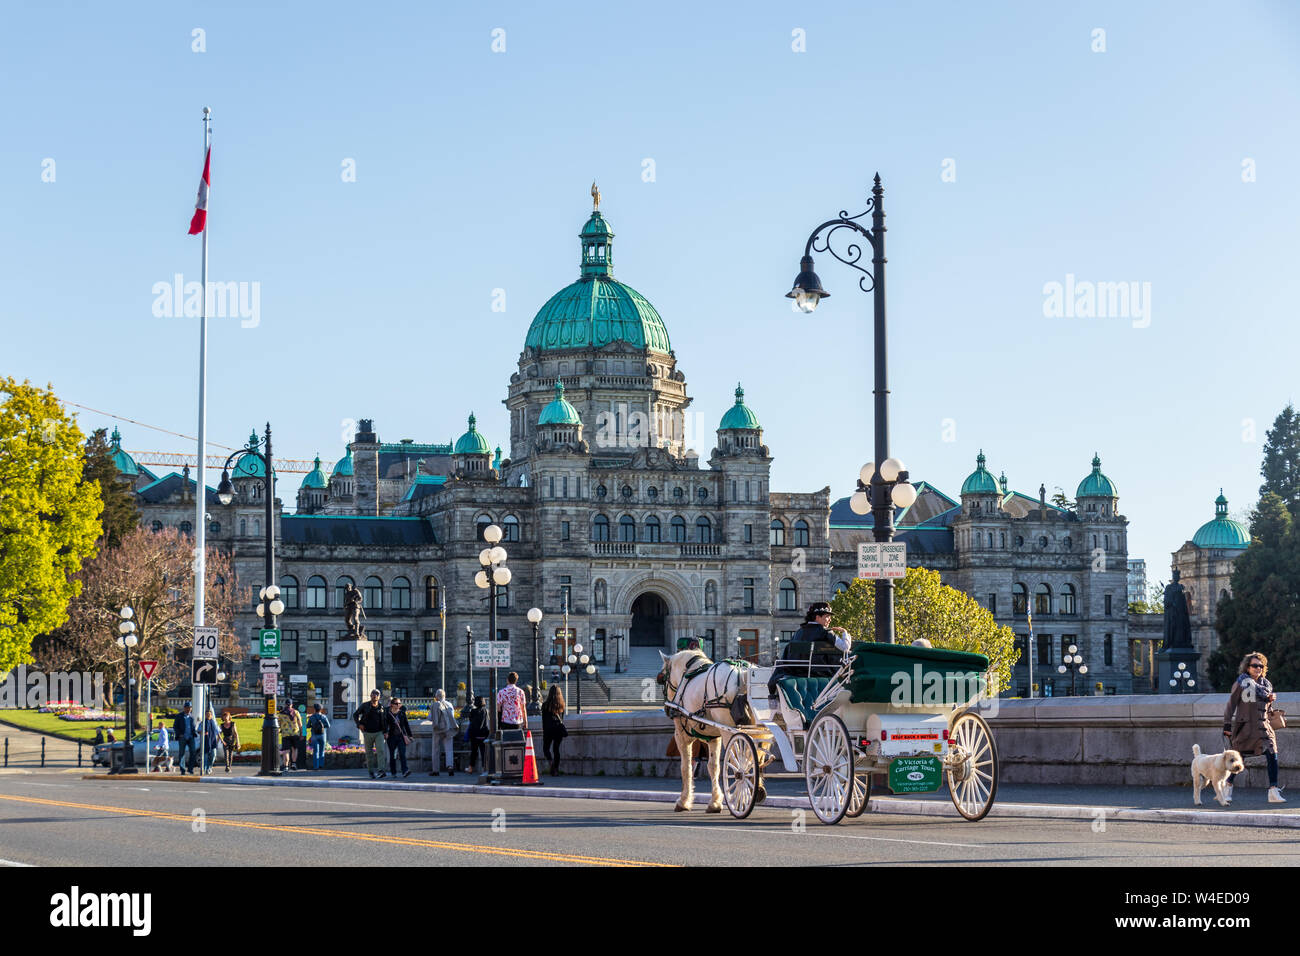 Legislative Assembly of British Columbia building seen while horse carriage travels in-front, along the Victoria, BC waterfront. Stock Photo